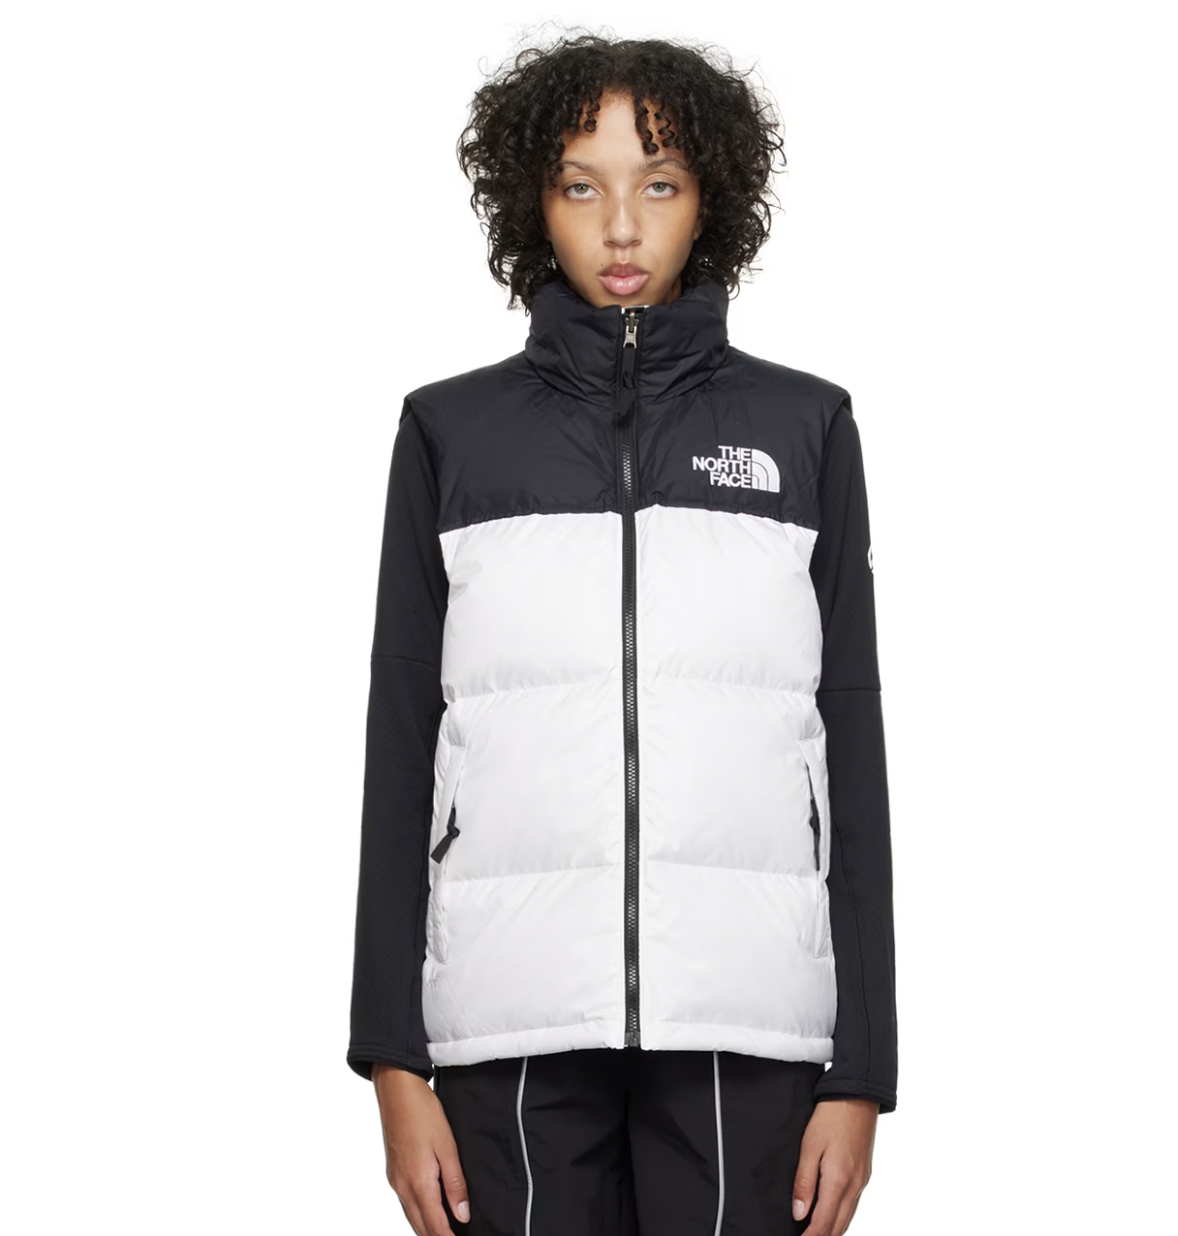 The North Face 北面 白色1996 女款羽绒马甲 5.2折 $127（约911元）